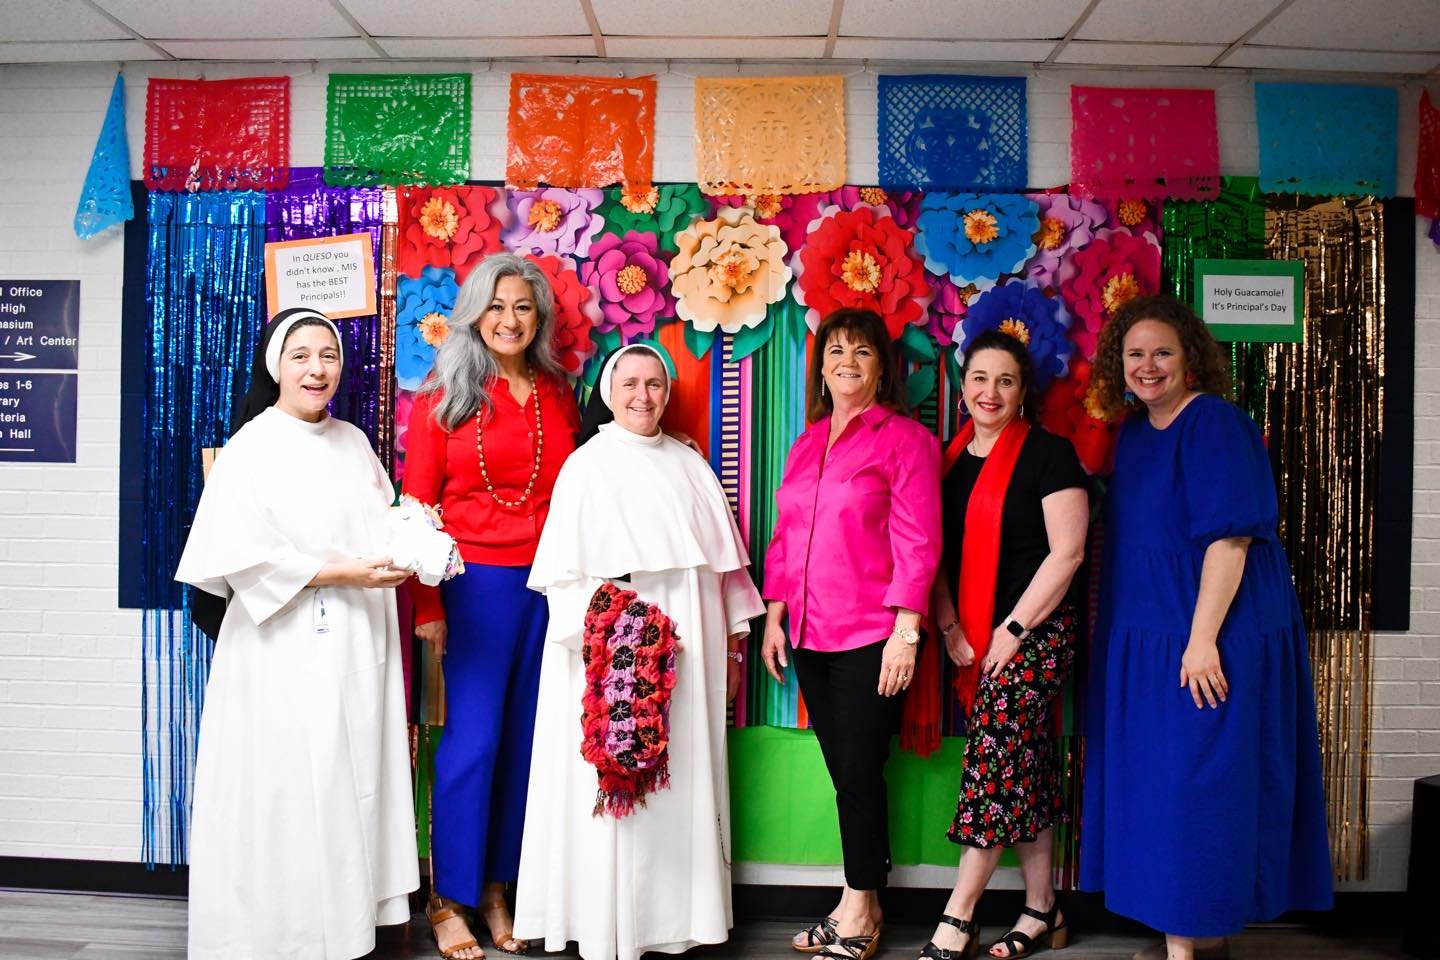 What a Fiesta! 
🌮🎉 Today, we turned up the heat with a belated Principals Day celebration like no other! We showered Sister Mary Anne and Mrs. Coffin with love and appreciation for all they do. From a delicious taco bar to sweet treats and a pictur